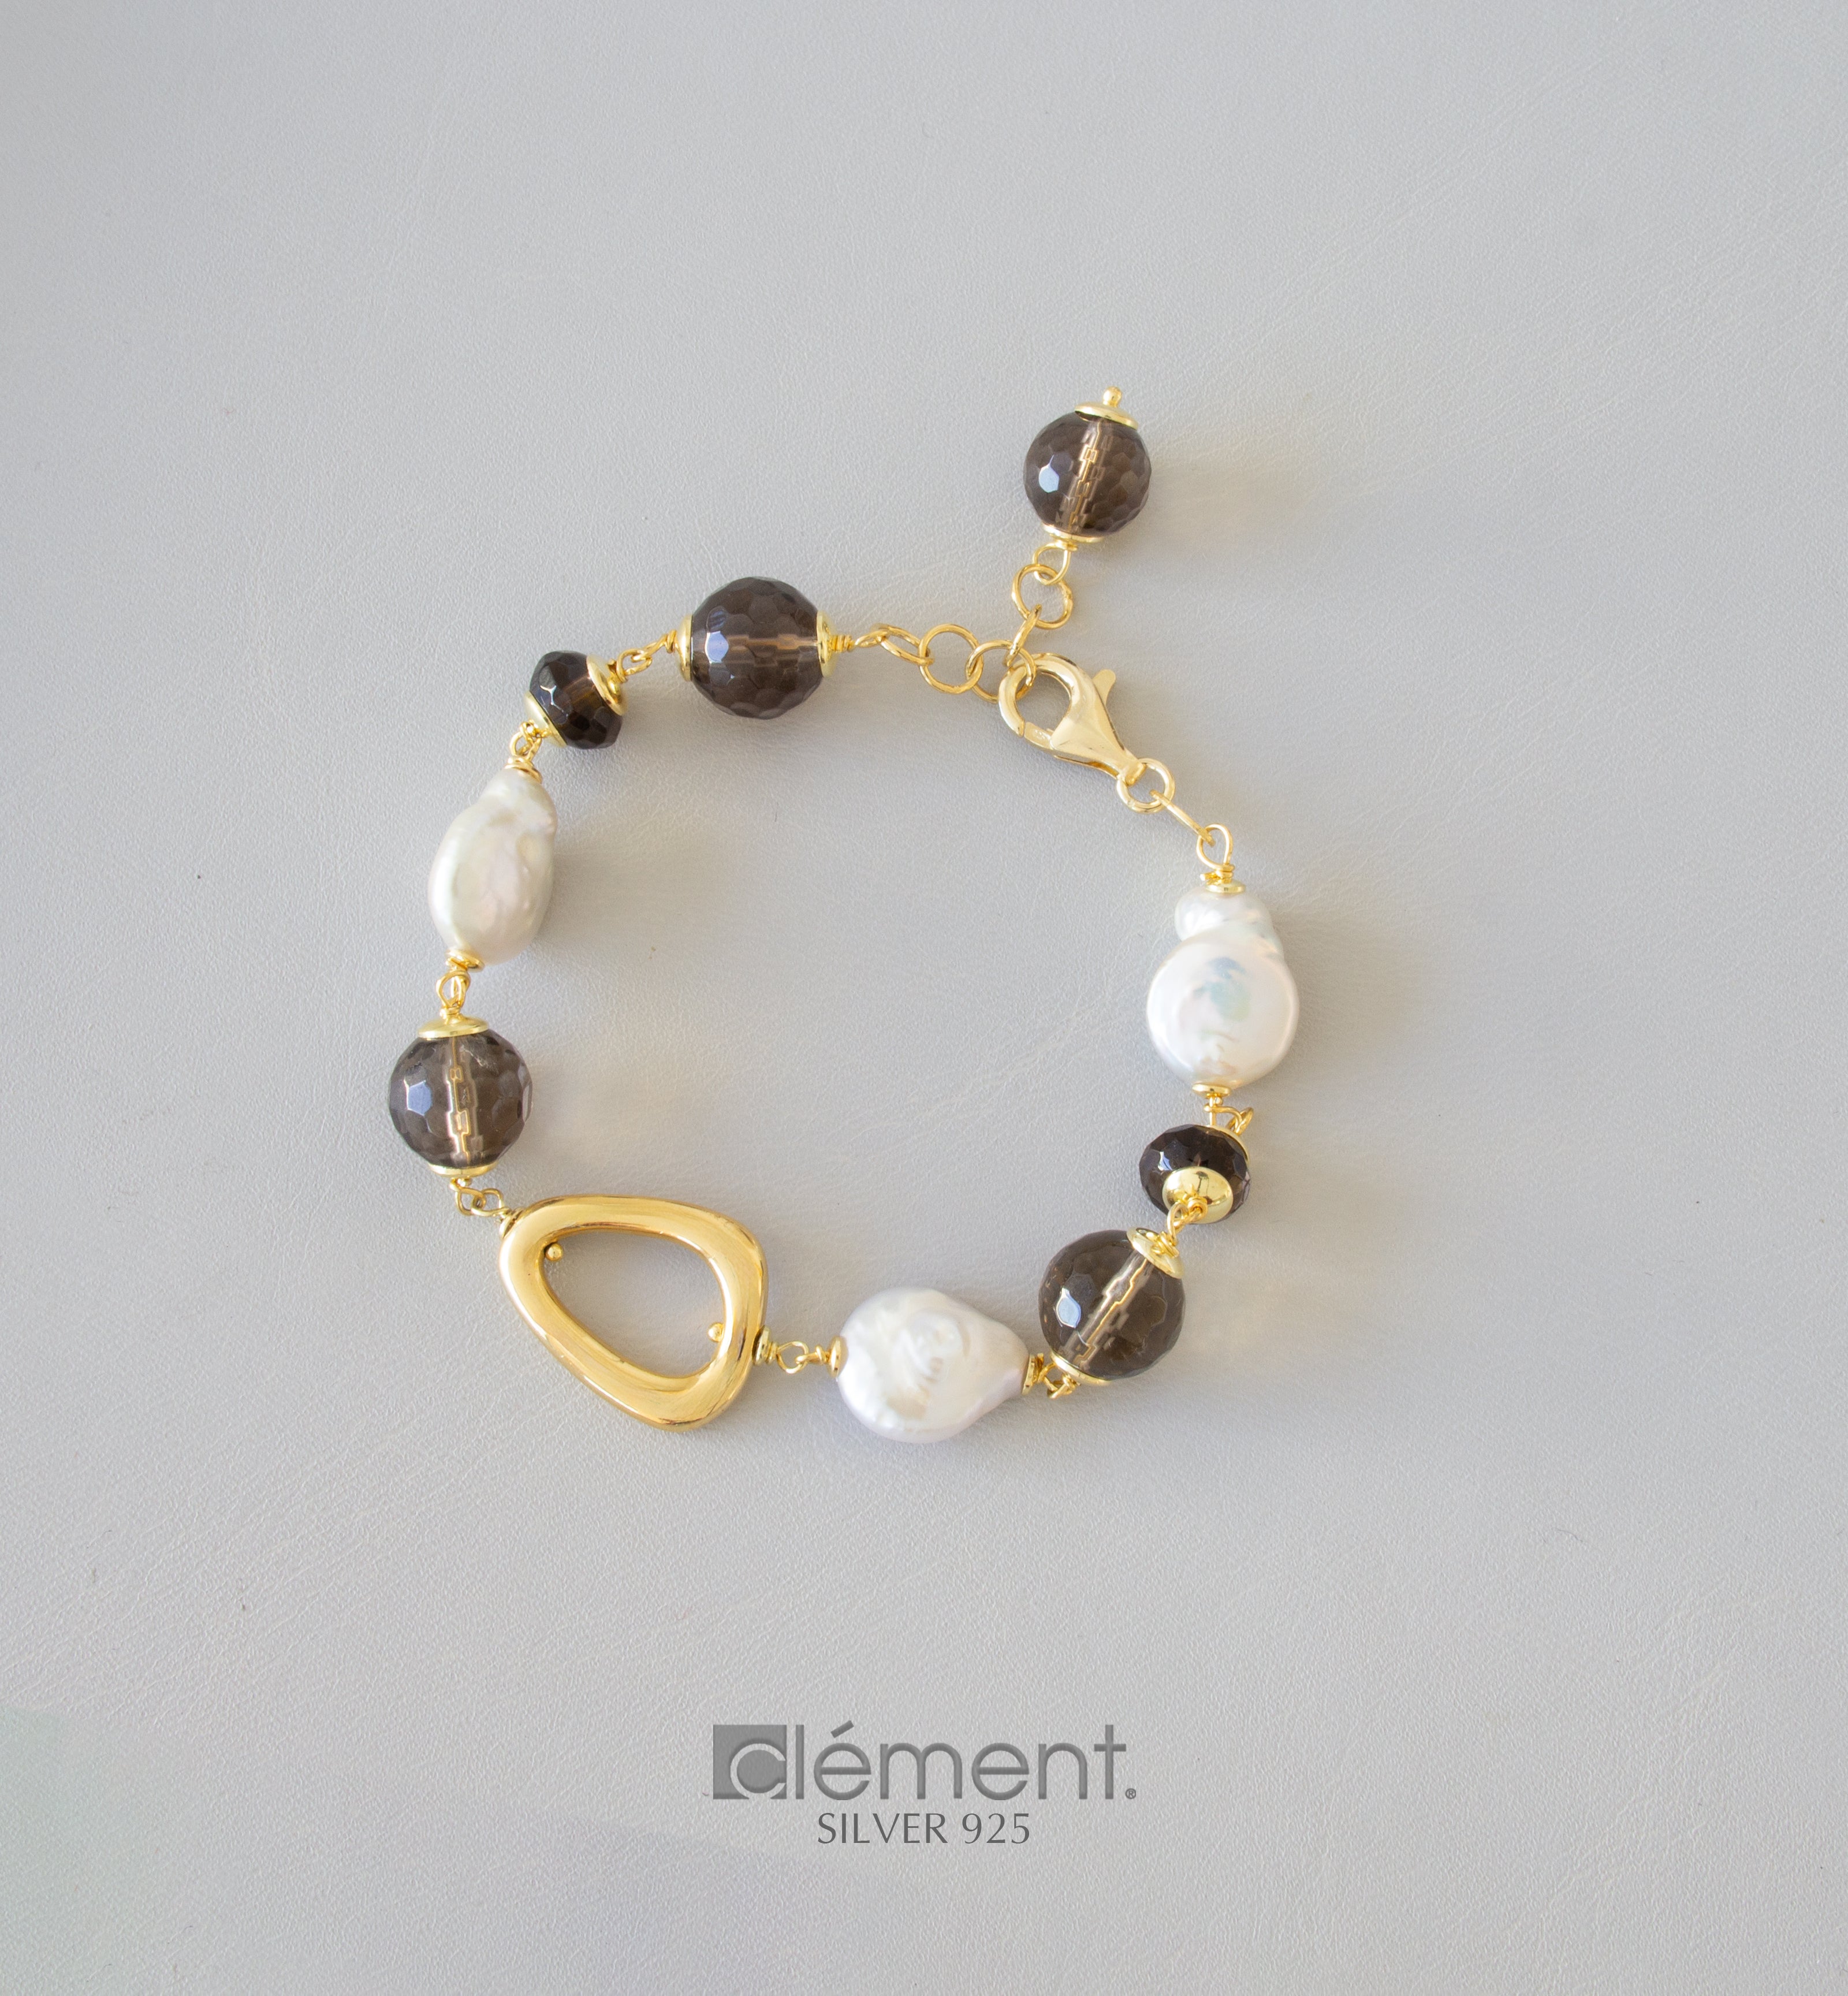 Silver 925 Bracelet with Semi-Precious Stones and Pearls